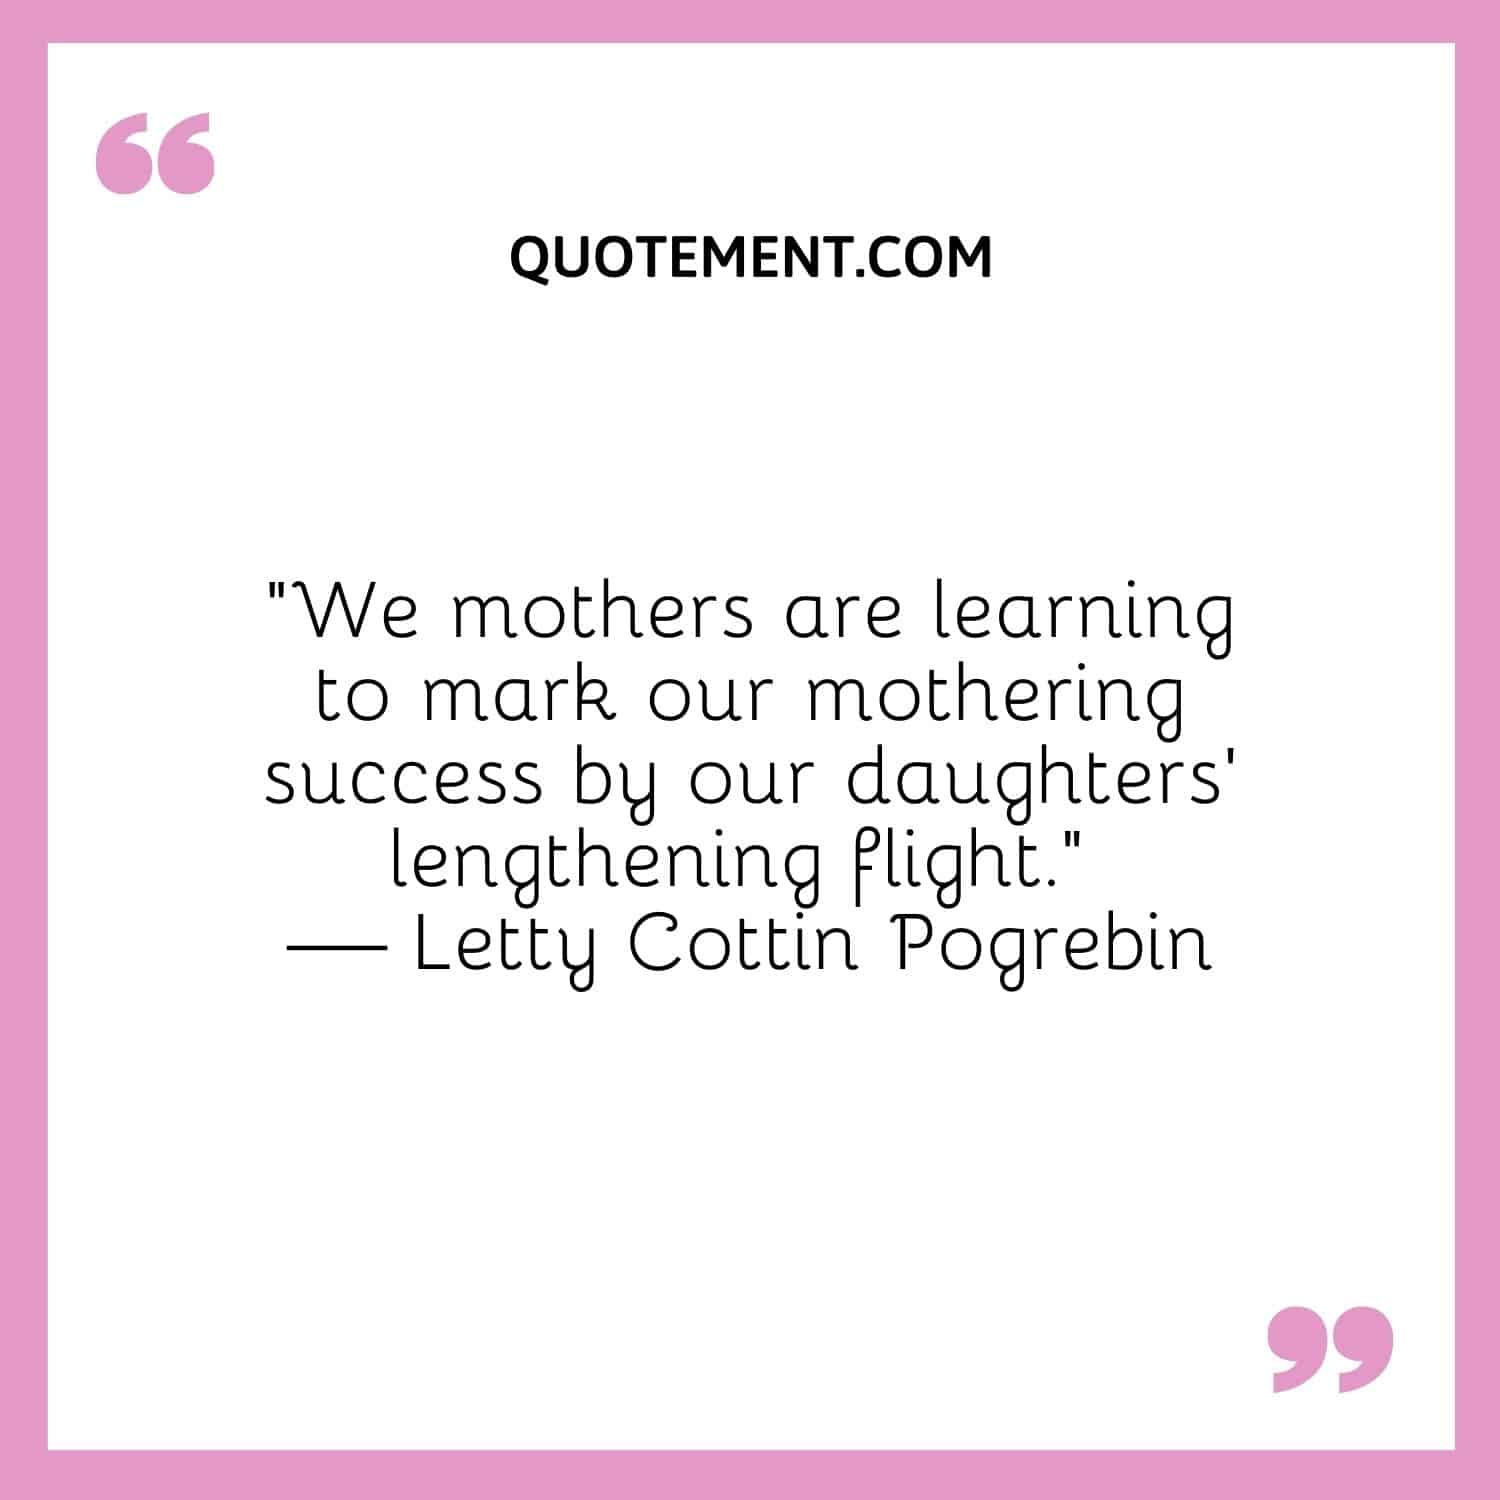 We mothers are learning to mark our mothering success by our daughters’ lengthening flight